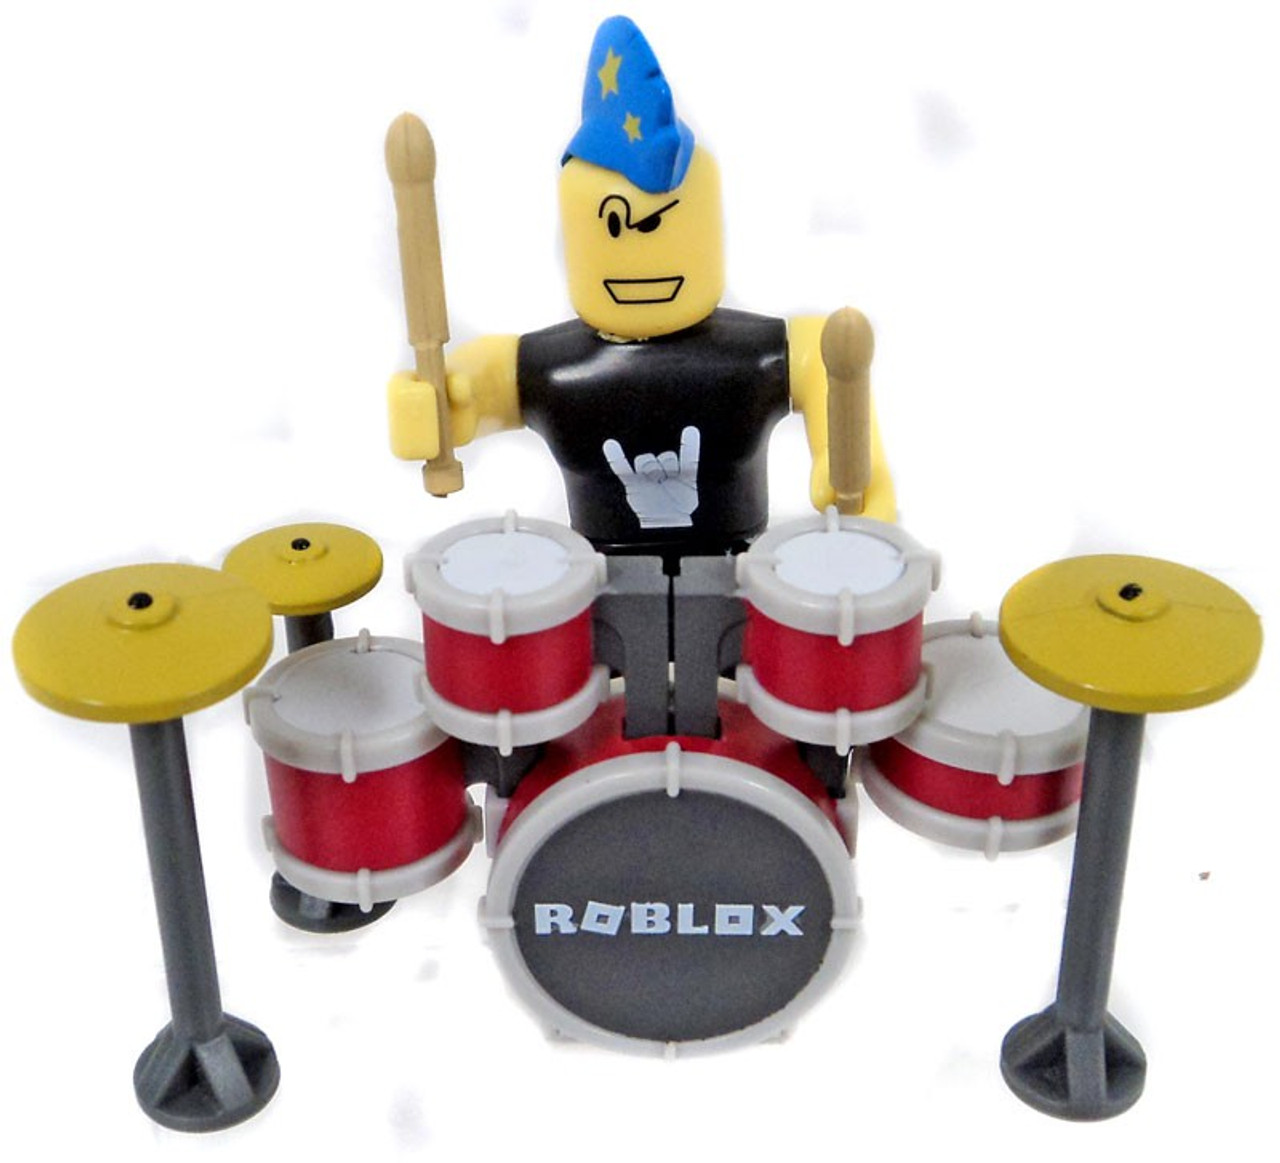 Roblox Punk Rocker With Drums 3 Minifigure Loose Jazwares Toywiz - tv movie video games action figures new roblox kids punk